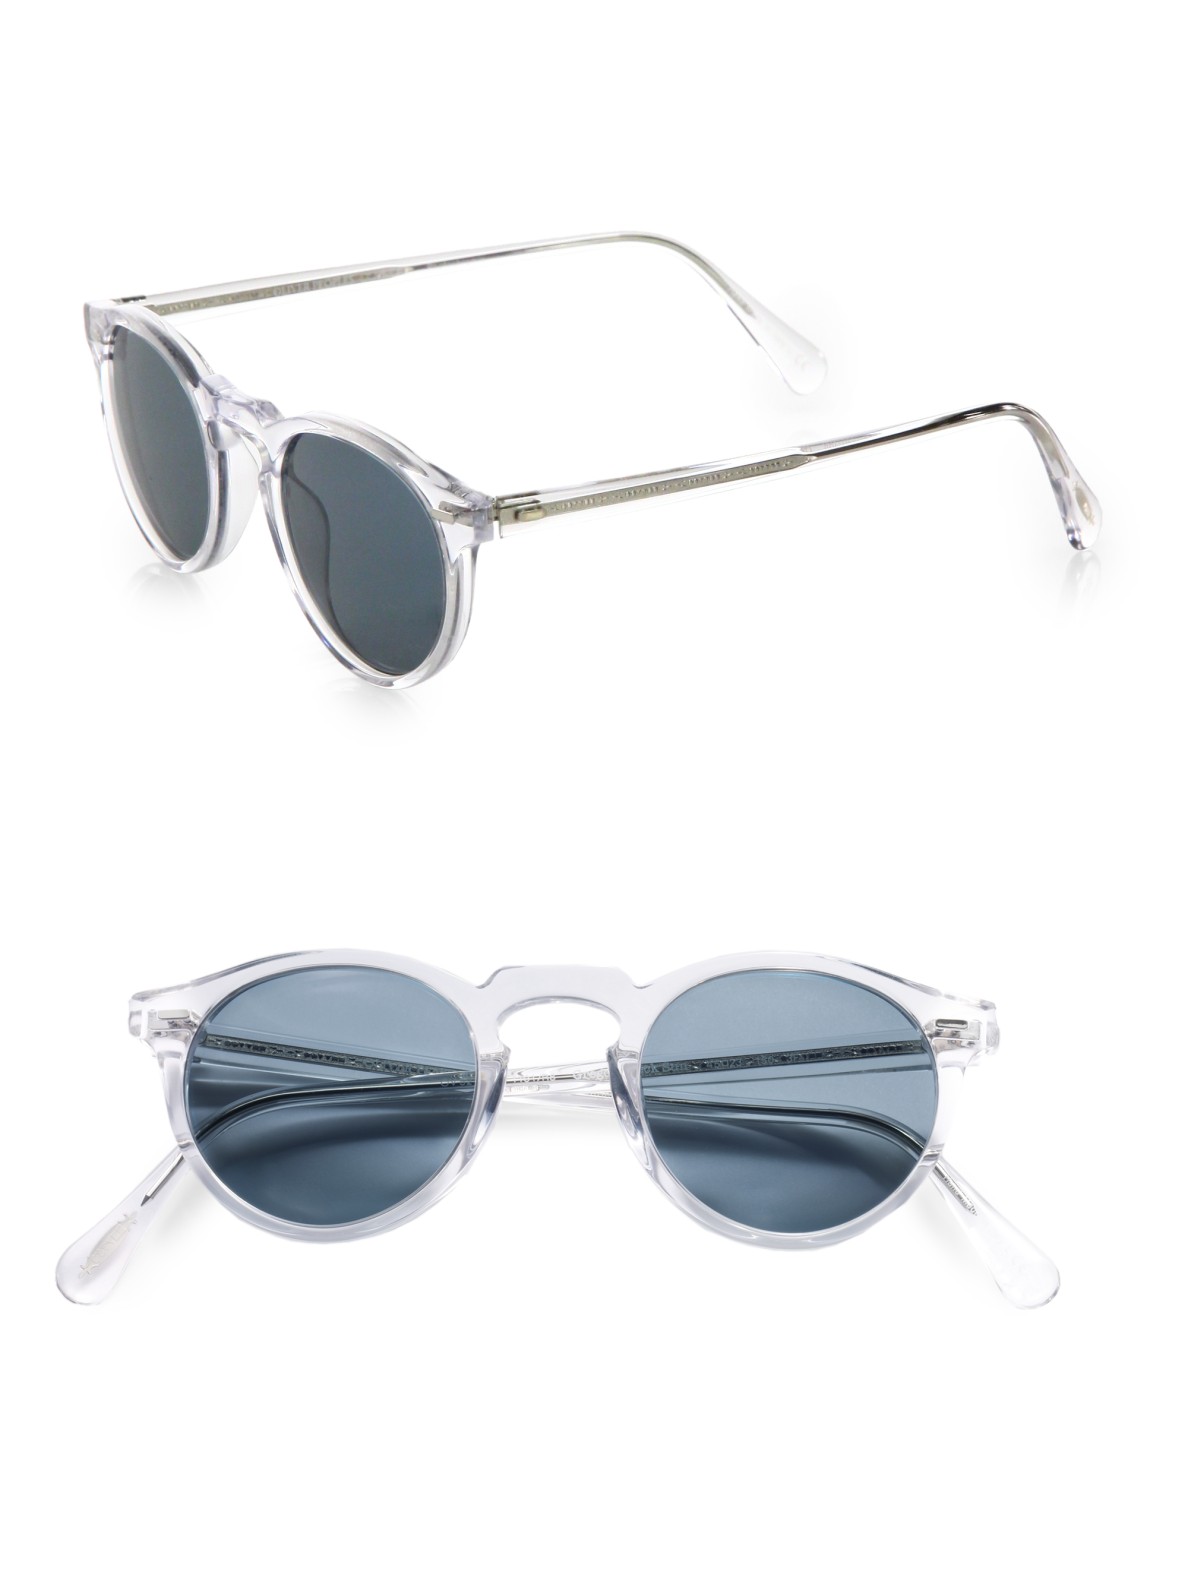 Lyst - Oliver Peoples Gregory Peck Oval Plastic Sunglasses in Gray